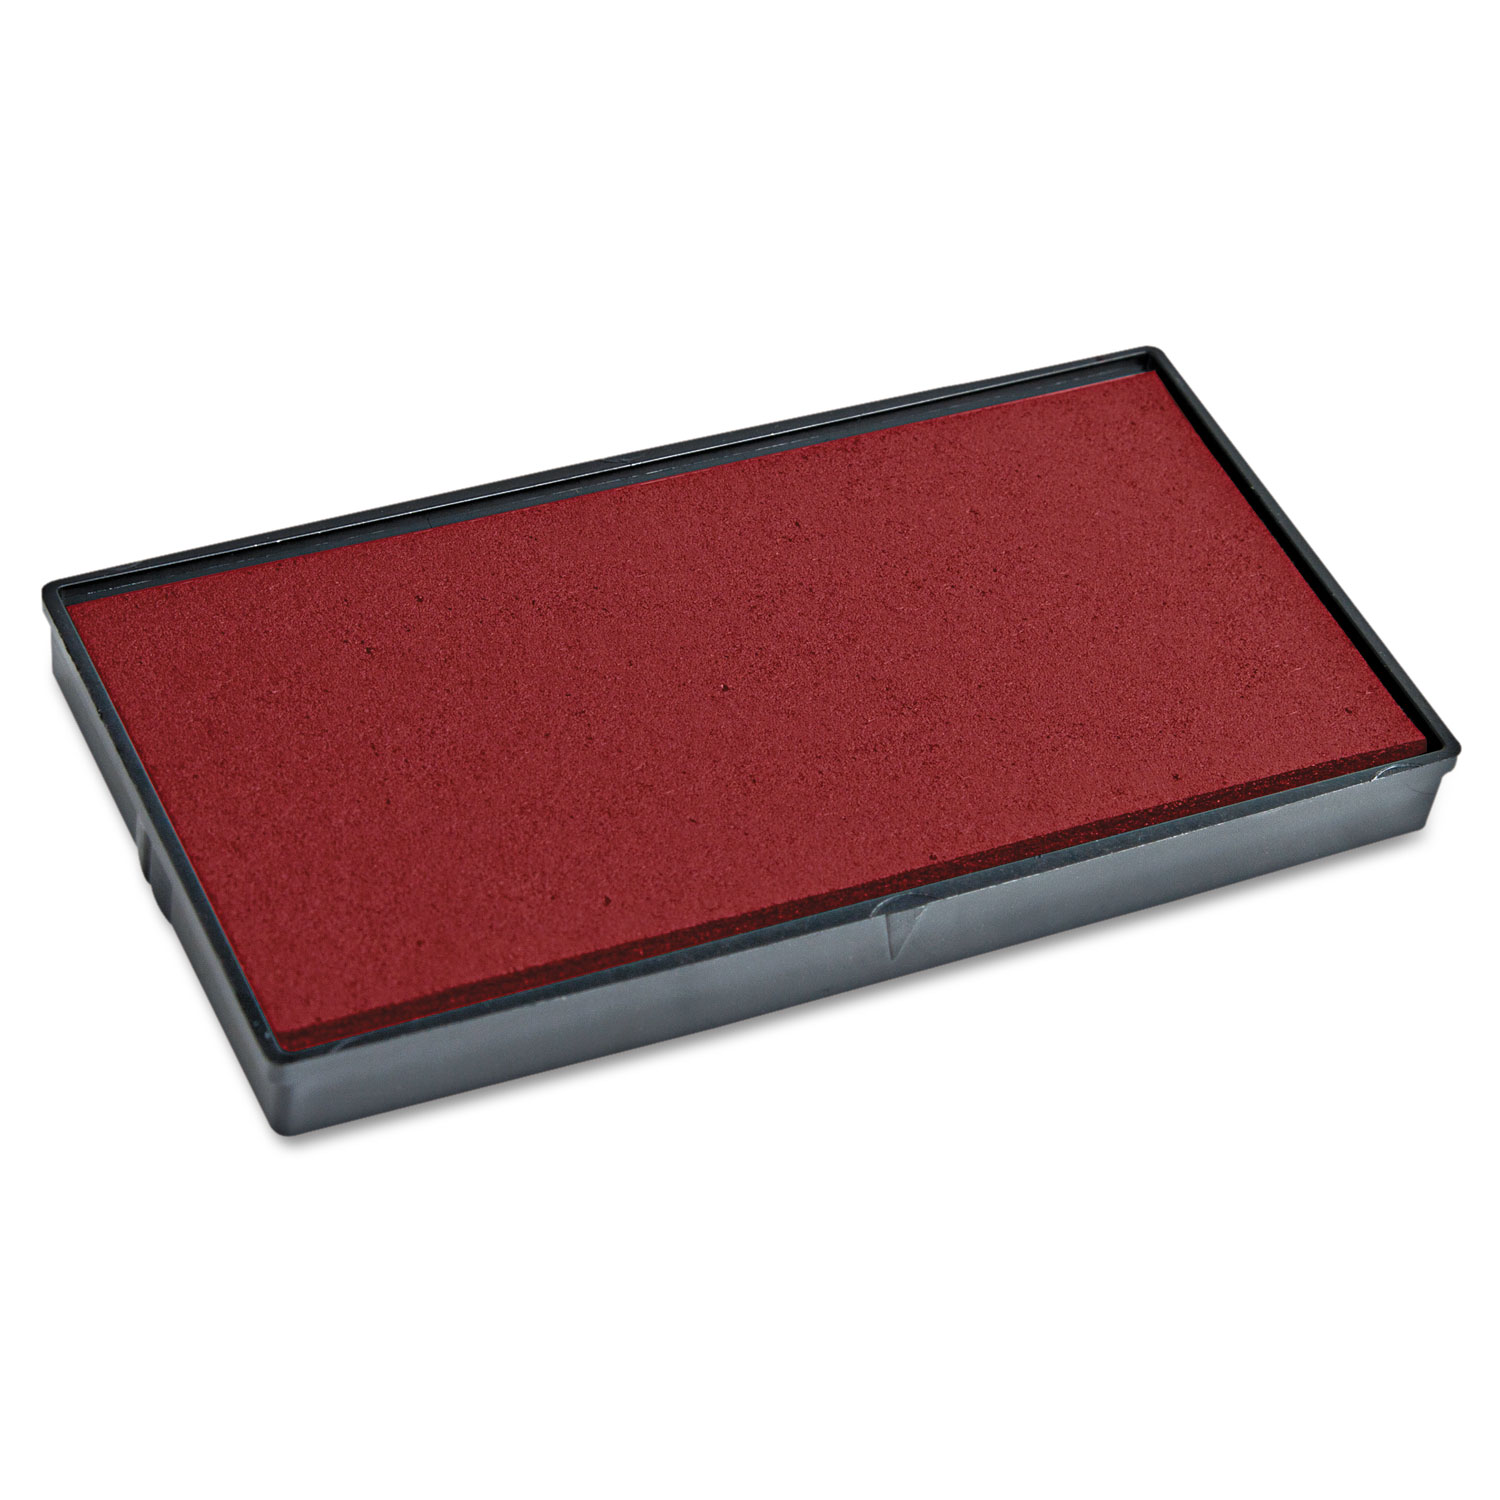 Replacement Ink Pad for 2000PLUS 1SI50P, Red